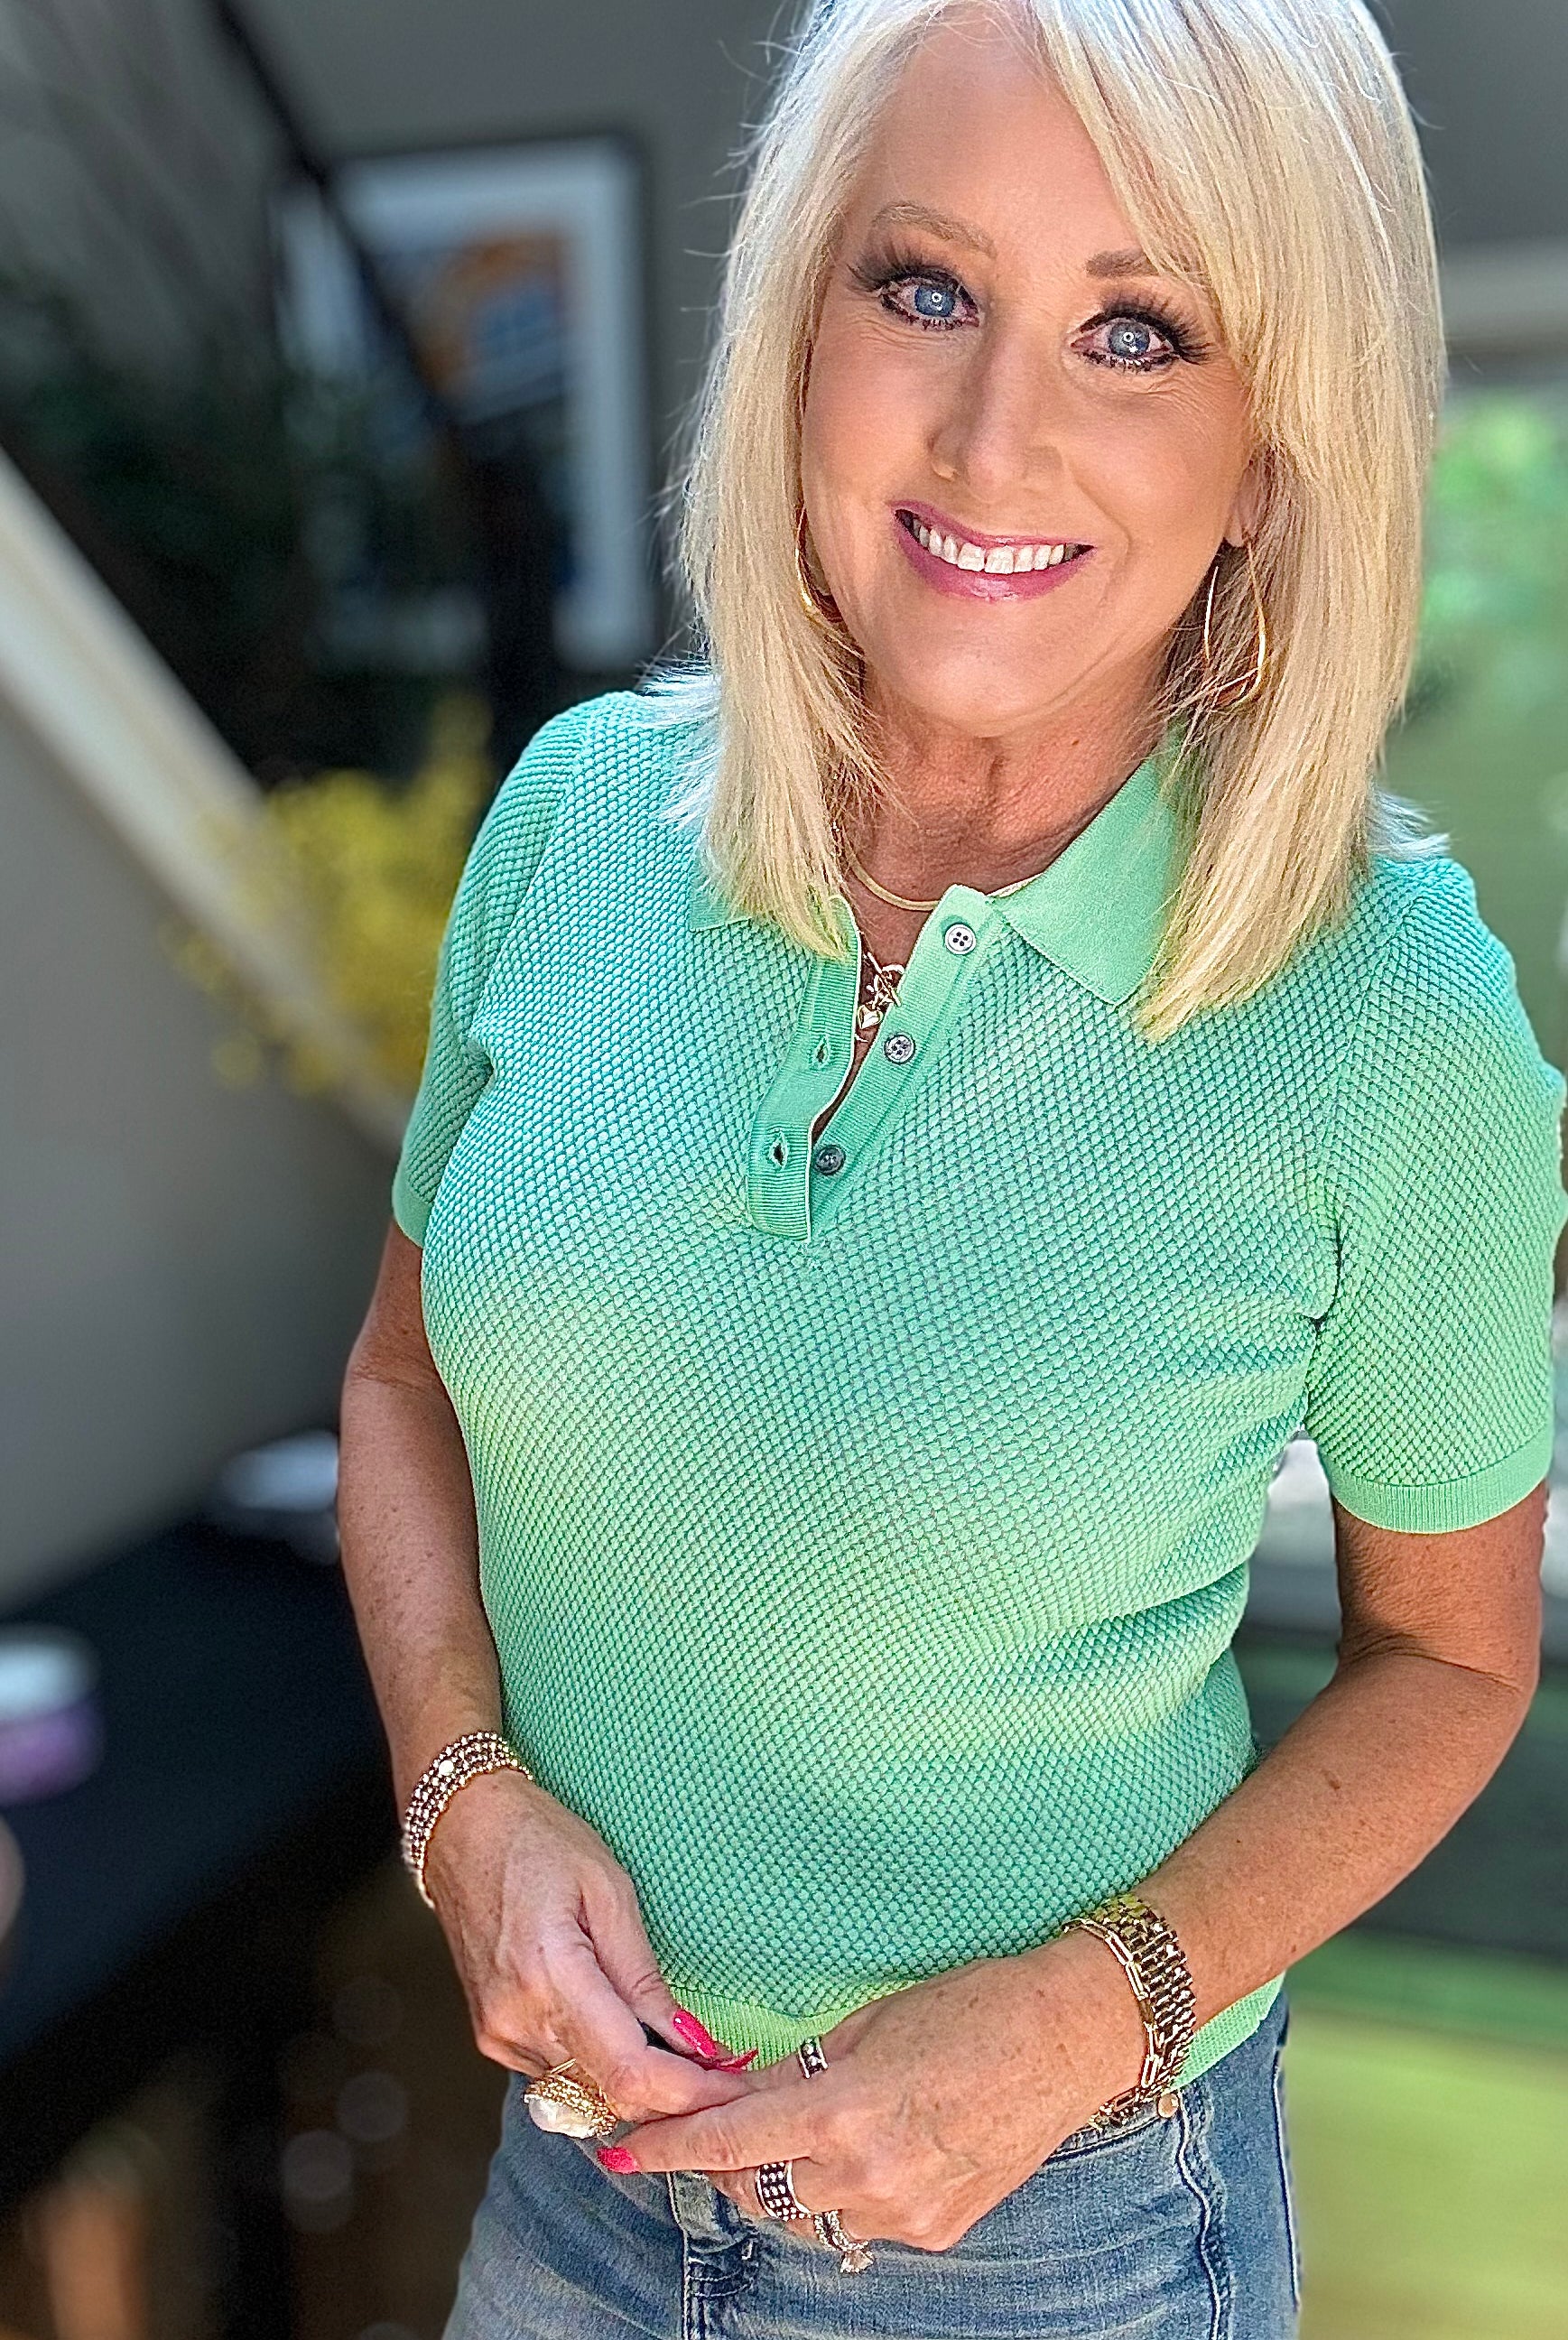 Soft Thermal Texture Two Colors Thread Polo Shirt Sweater in Sage-Short Sleeves-Ave Shops-Urban Threadz Boutique, Women's Fashion Boutique in Saugatuck, MI